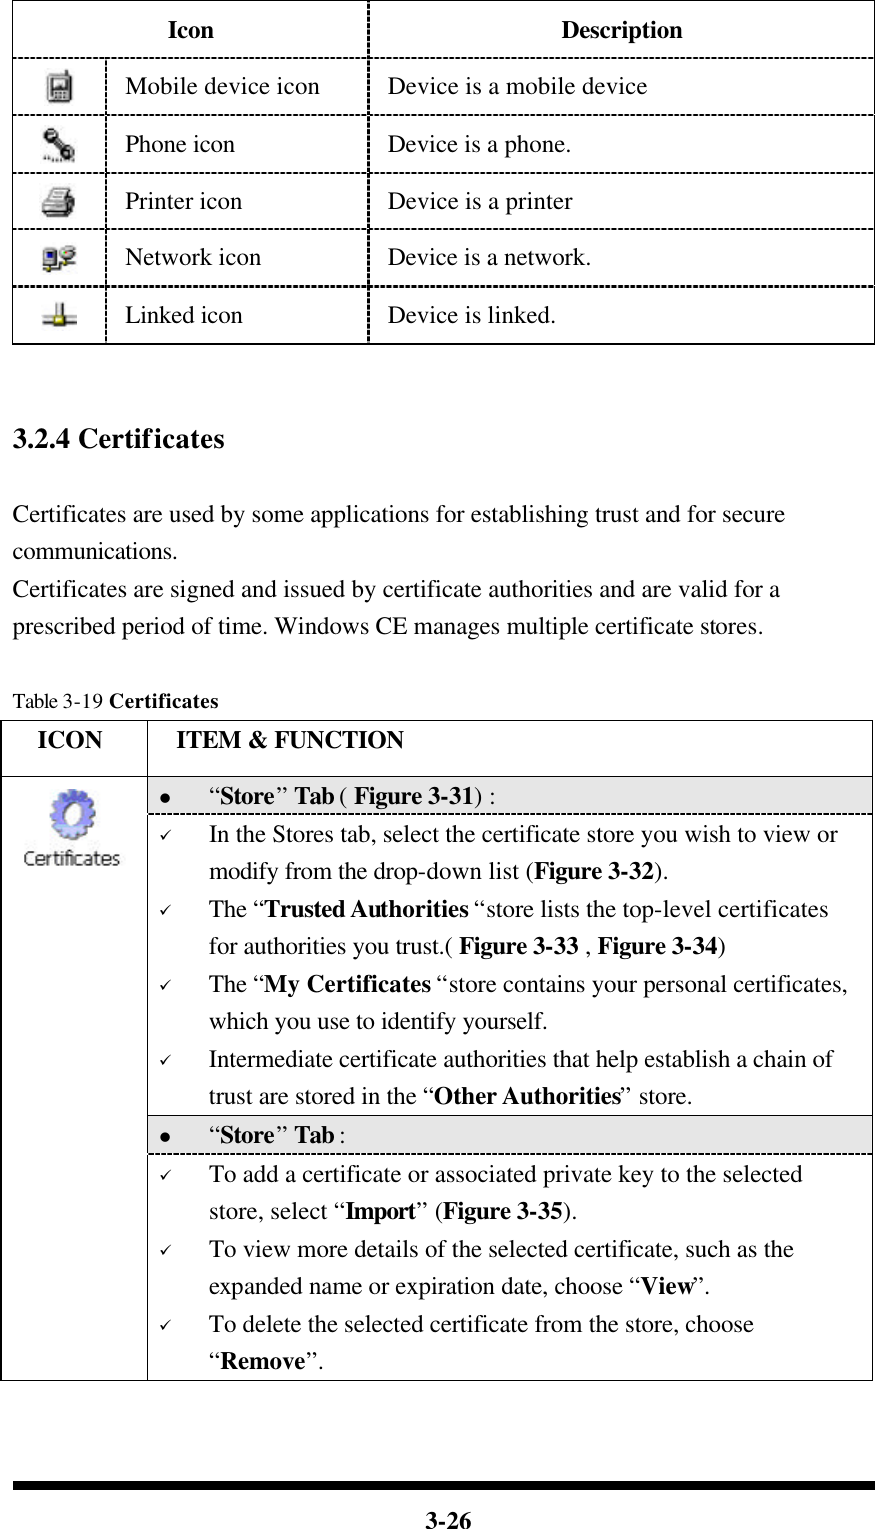  3-26 Icon Description  Mobile device icon Device is a mobile device  Phone icon Device is a phone.  Printer icon Device is a printer  Network icon Device is a network.  Linked icon Device is linked.   3.2.4 Certificates  Certificates are used by some applications for establishing trust and for secure communications. Certificates are signed and issued by certificate authorities and are valid for a prescribed period of time. Windows CE manages multiple certificate stores.  Table 3-19 Certificates   ICON  ITEM &amp; FUNCTION l “Store” Tab ( Figure 3-31) :   ü In the Stores tab, select the certificate store you wish to view or modify from the drop-down list (Figure 3-32).   ü The “Trusted Authorities “store lists the top-level certificates for authorities you trust.( Figure 3-33 , Figure 3-34)   ü The “My Certificates “store contains your personal certificates, which you use to identify yourself.   ü Intermediate certificate authorities that help establish a chain of trust are stored in the “Other Authorities” store. l “Store” Tab :    ü To add a certificate or associated private key to the selected store, select “Import” (Figure 3-35). ü To view more details of the selected certificate, such as the expanded name or expiration date, choose “View”. ü To delete the selected certificate from the store, choose “Remove”.   